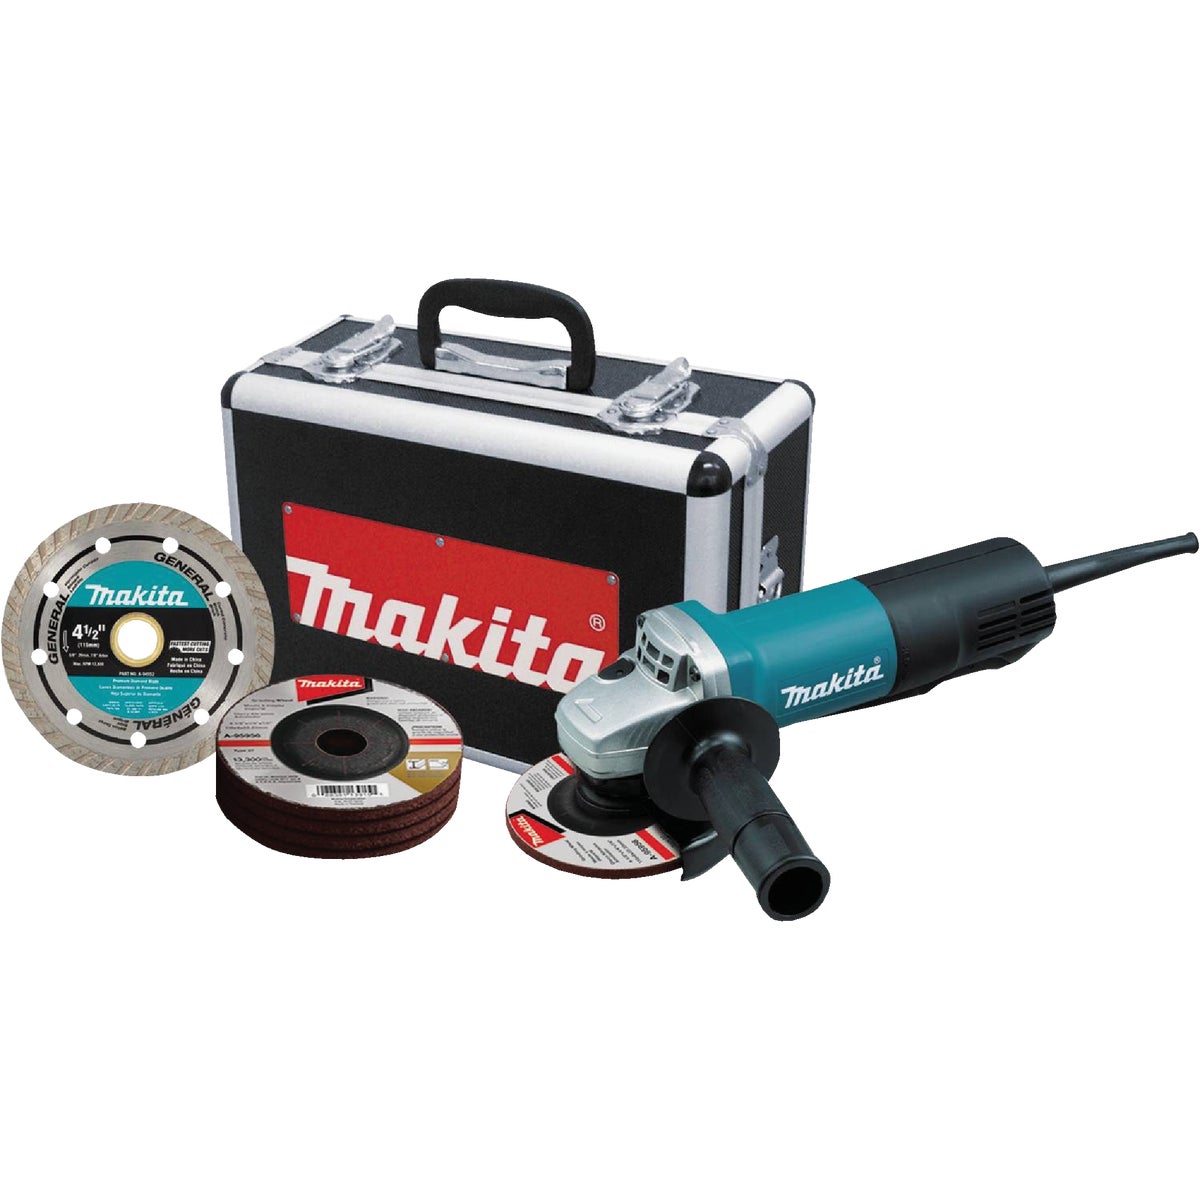 Makita 4-1/2 In. 7.5-Amp Cut-Off/Angle Grinder